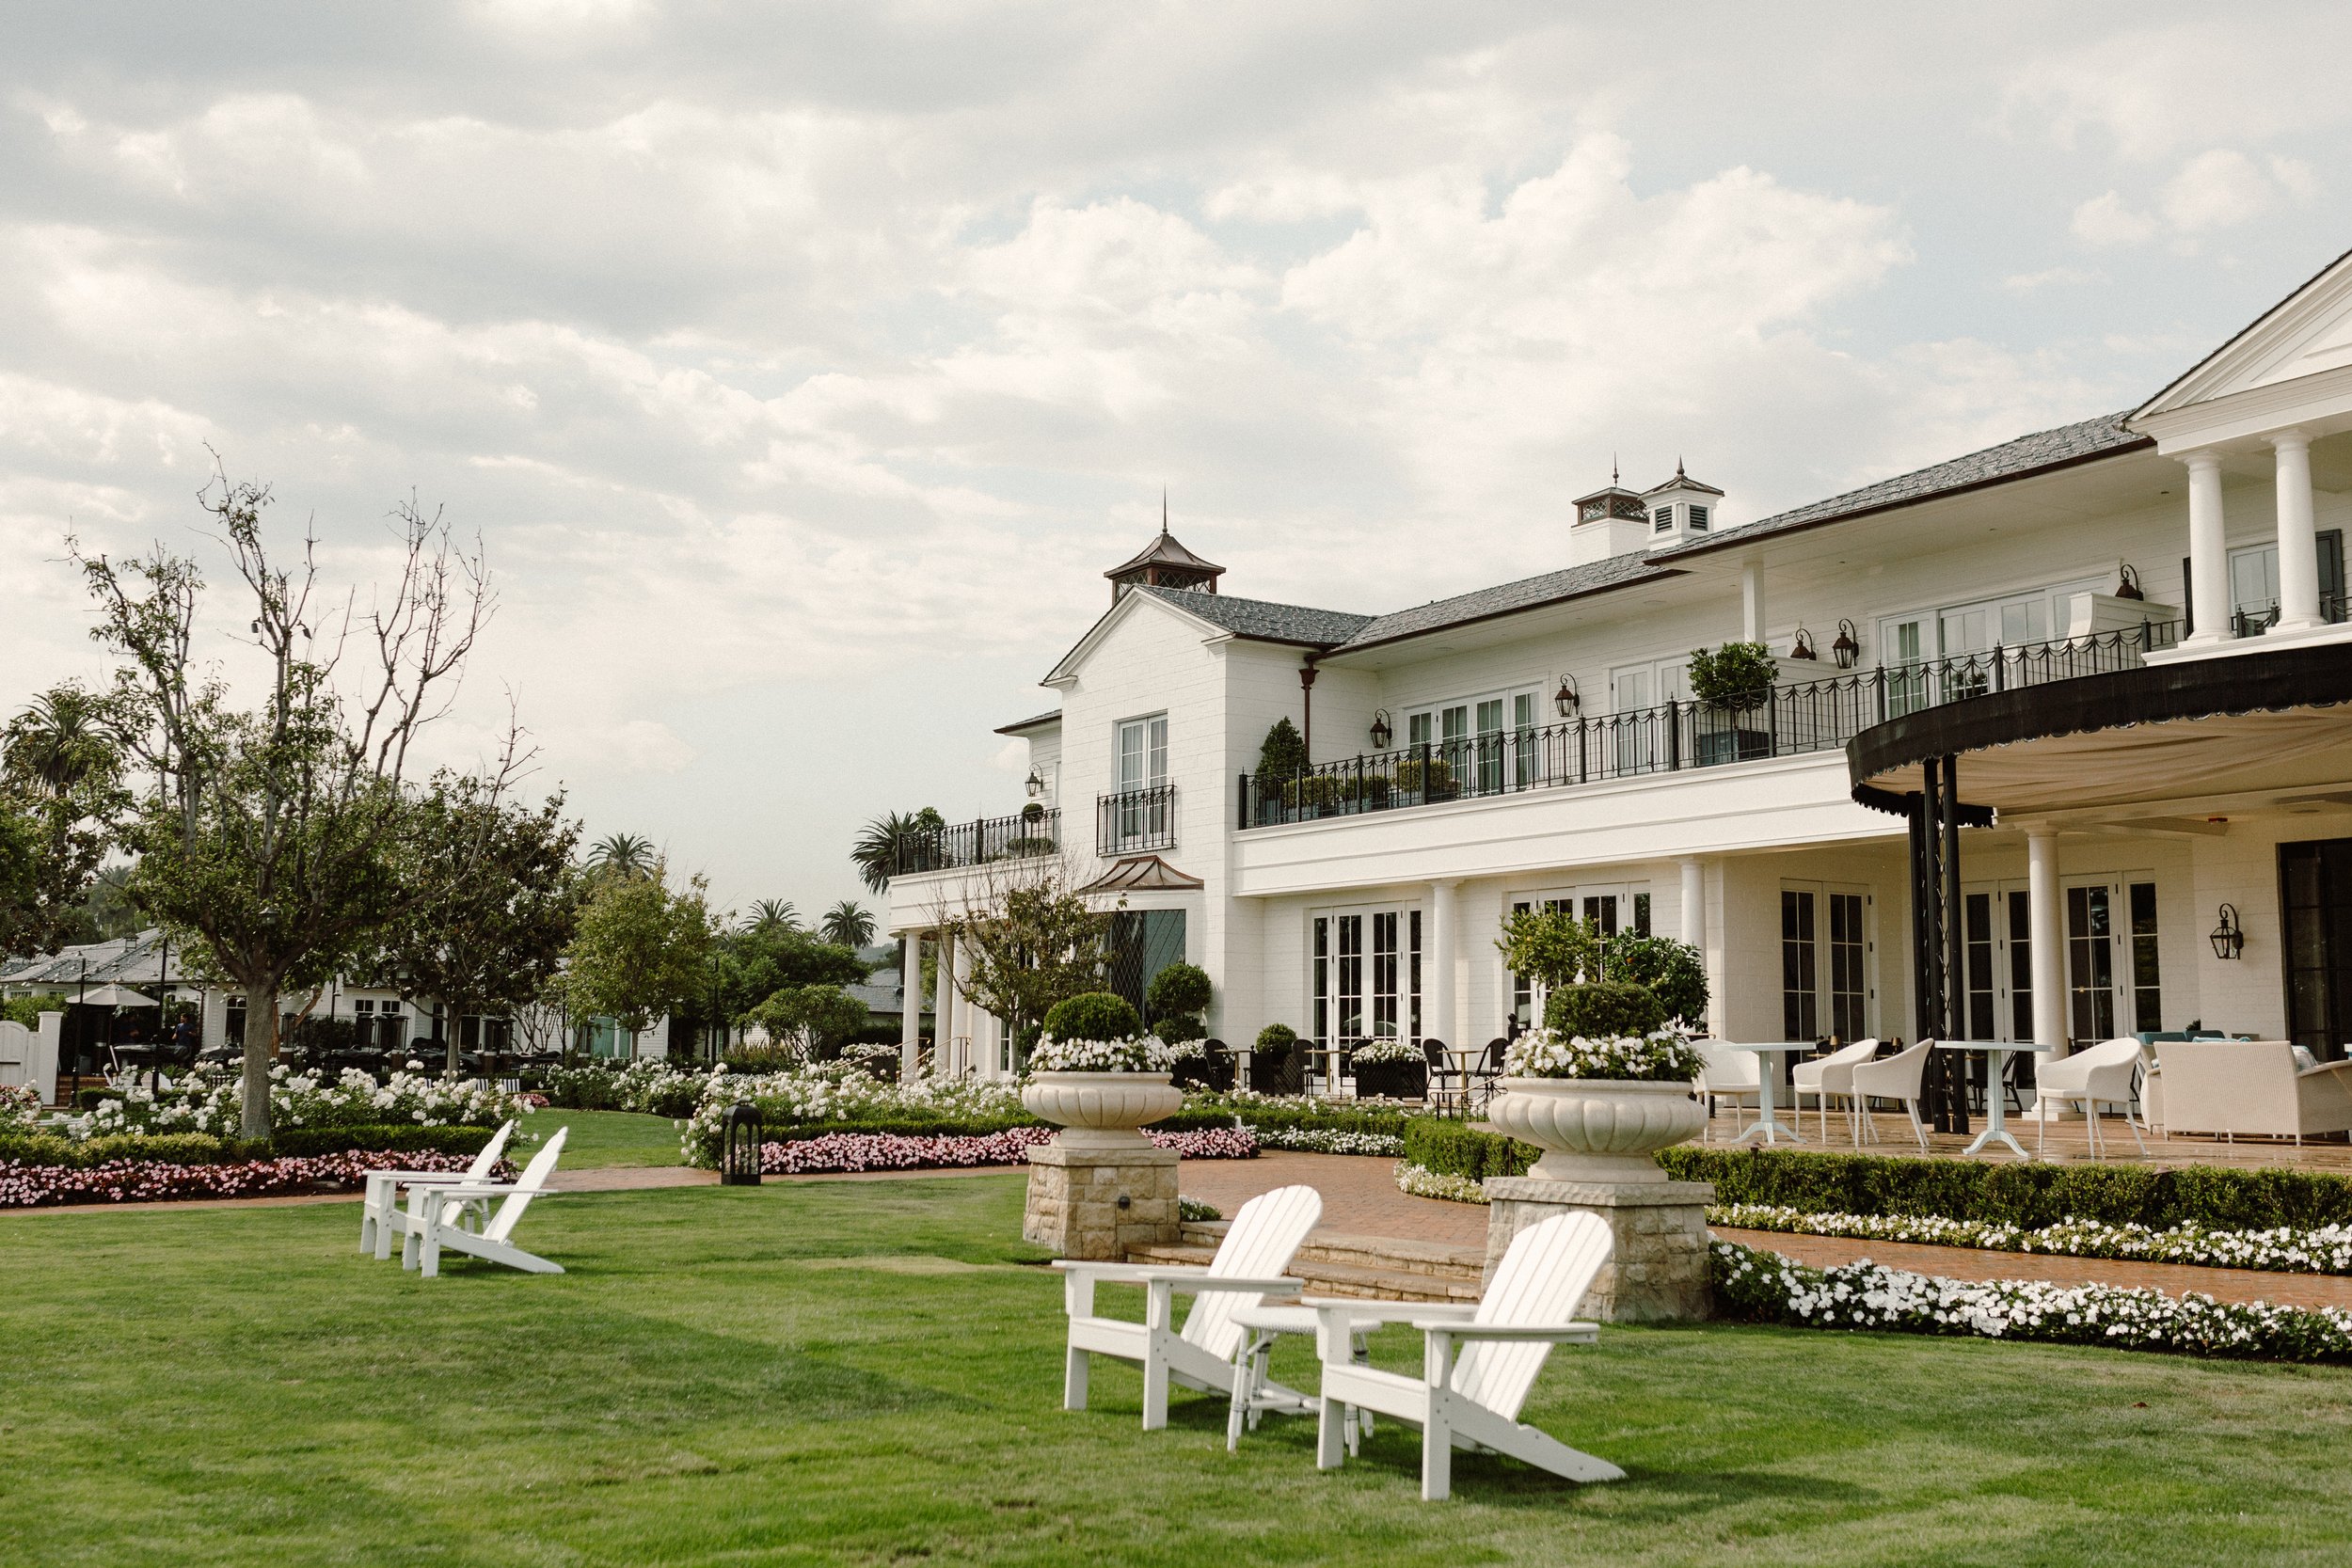 www.santabarbarawedding.com | Nicole Donnelly | Rosewood Miramar Beach | The Outside of the Venue